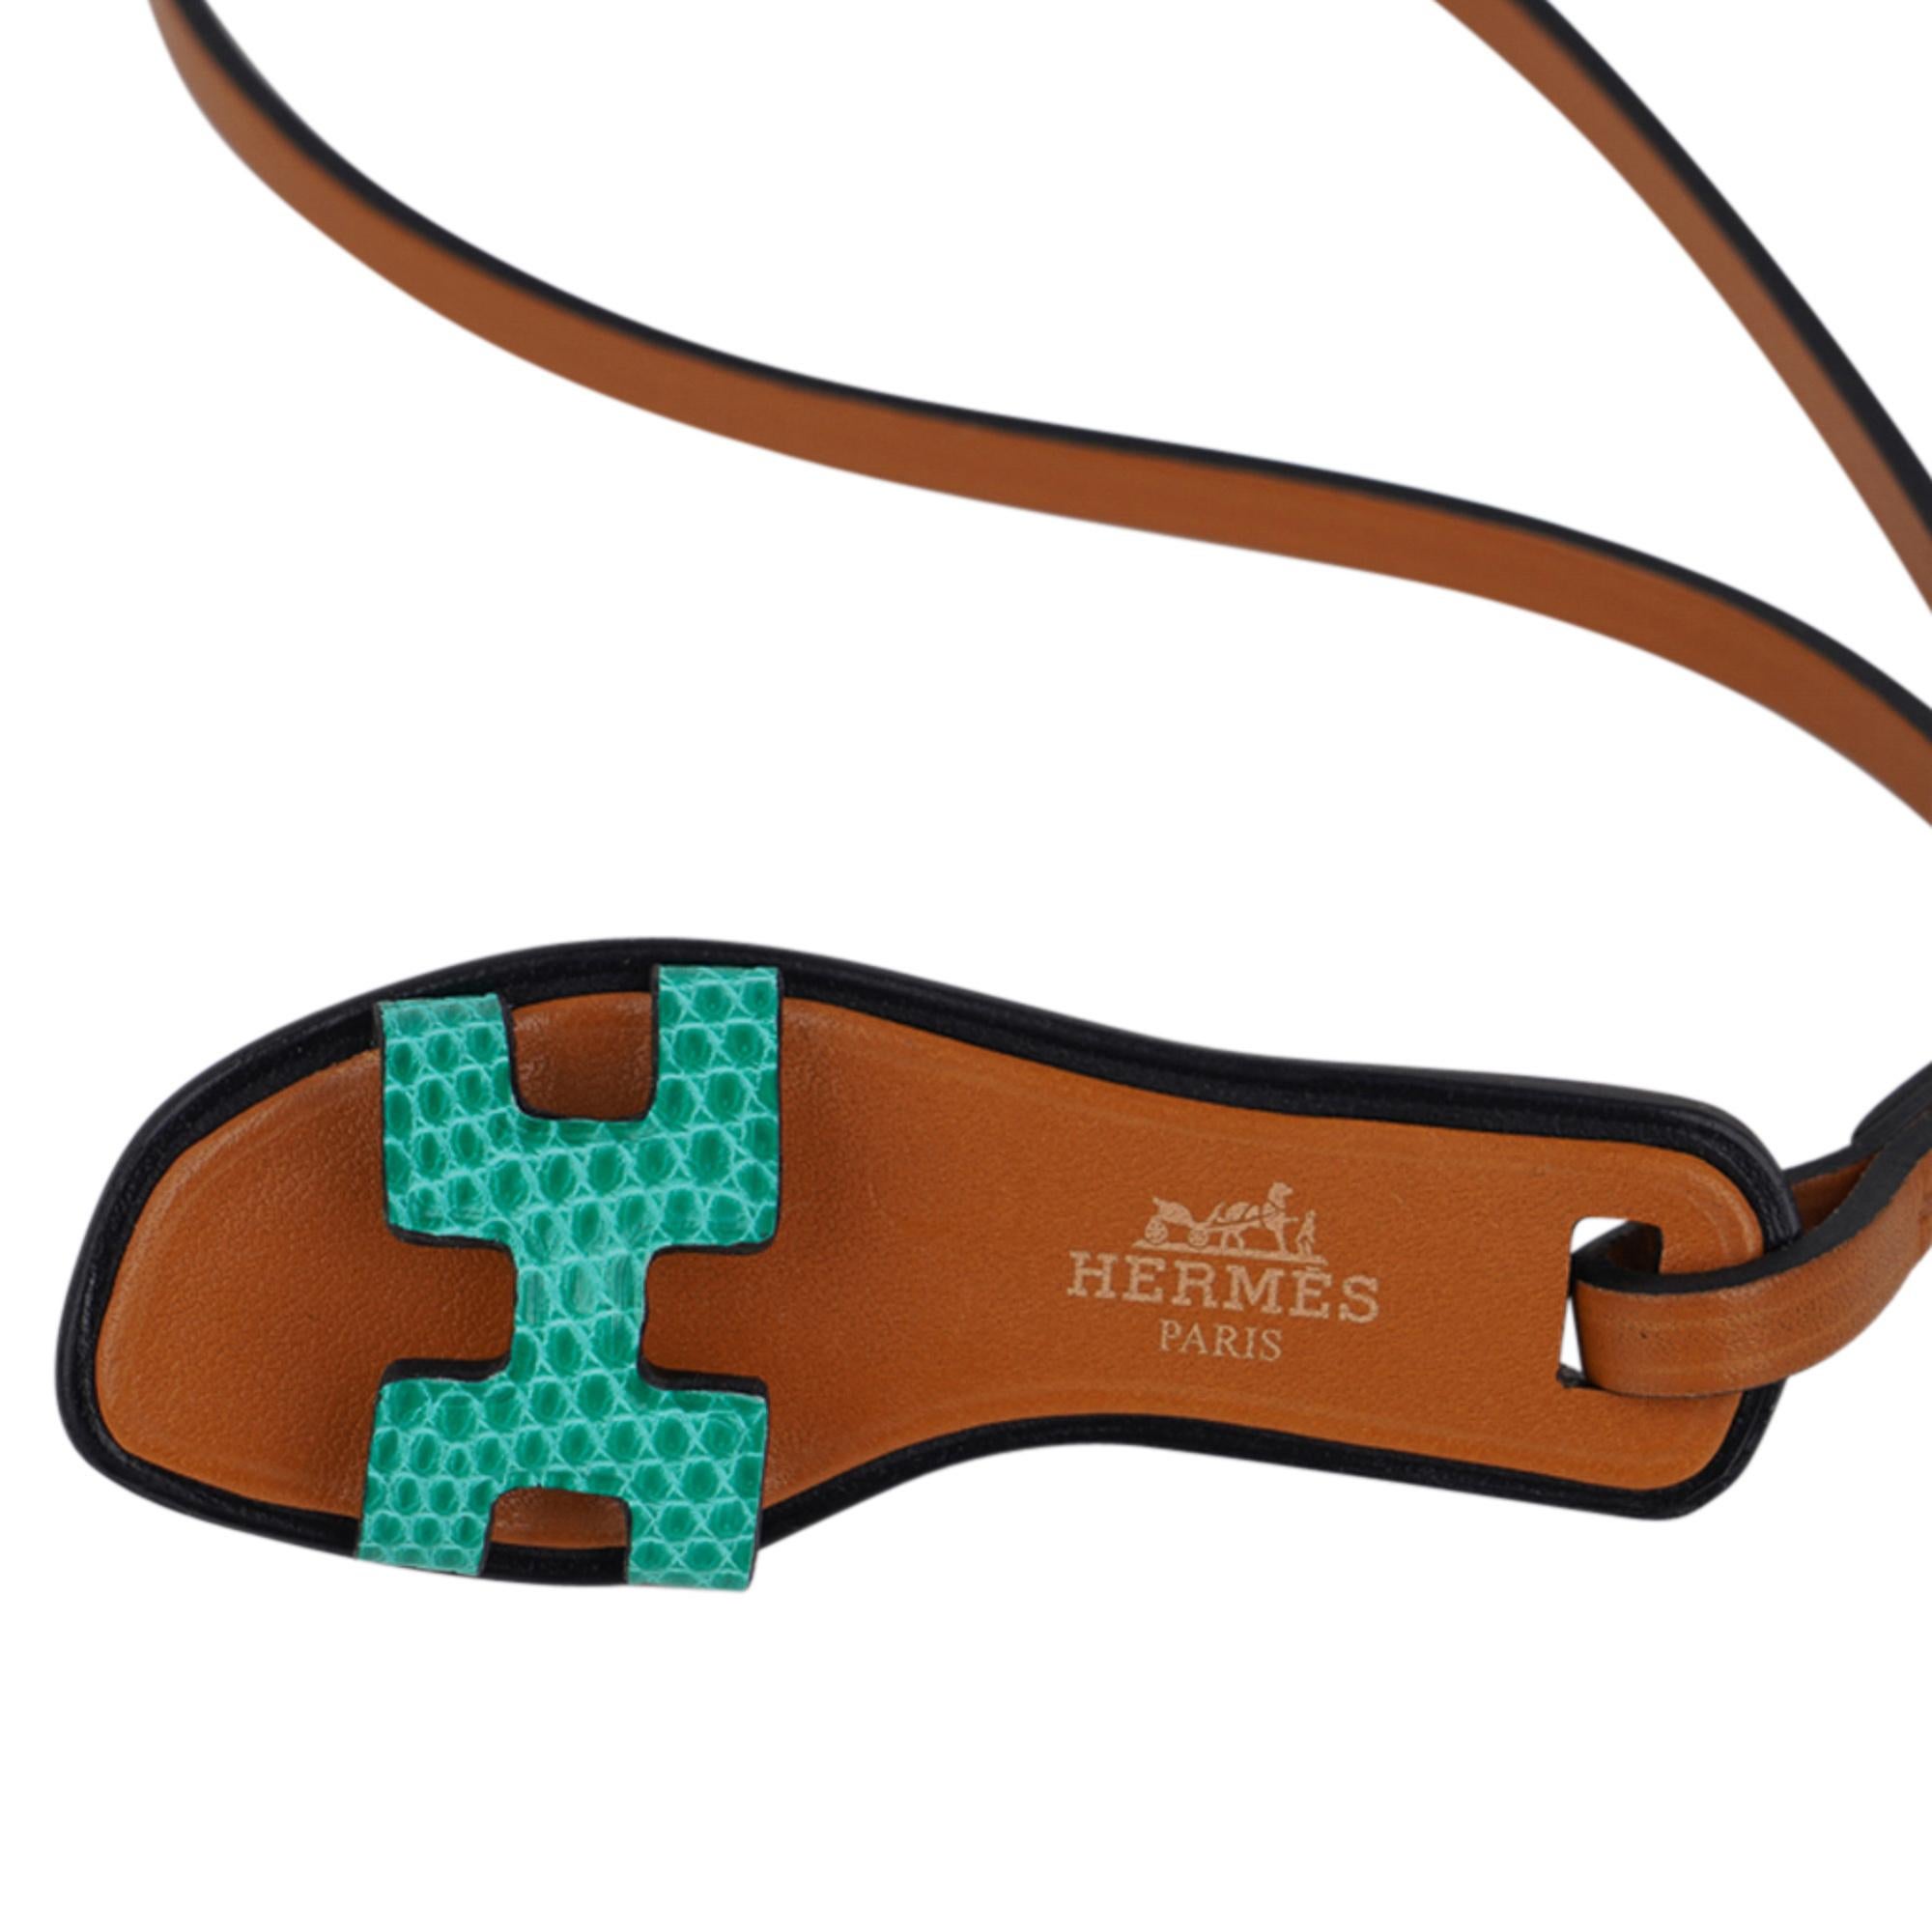 Mightychic offers an Hermes Oran Nano bag charm featured in fresh green lizard.
Charming and playful she easily adorns a myriad bag colours in your fabulous collection.
Hermes Paris hot stamp on the upper sole.
Comes with signature Hermes box and